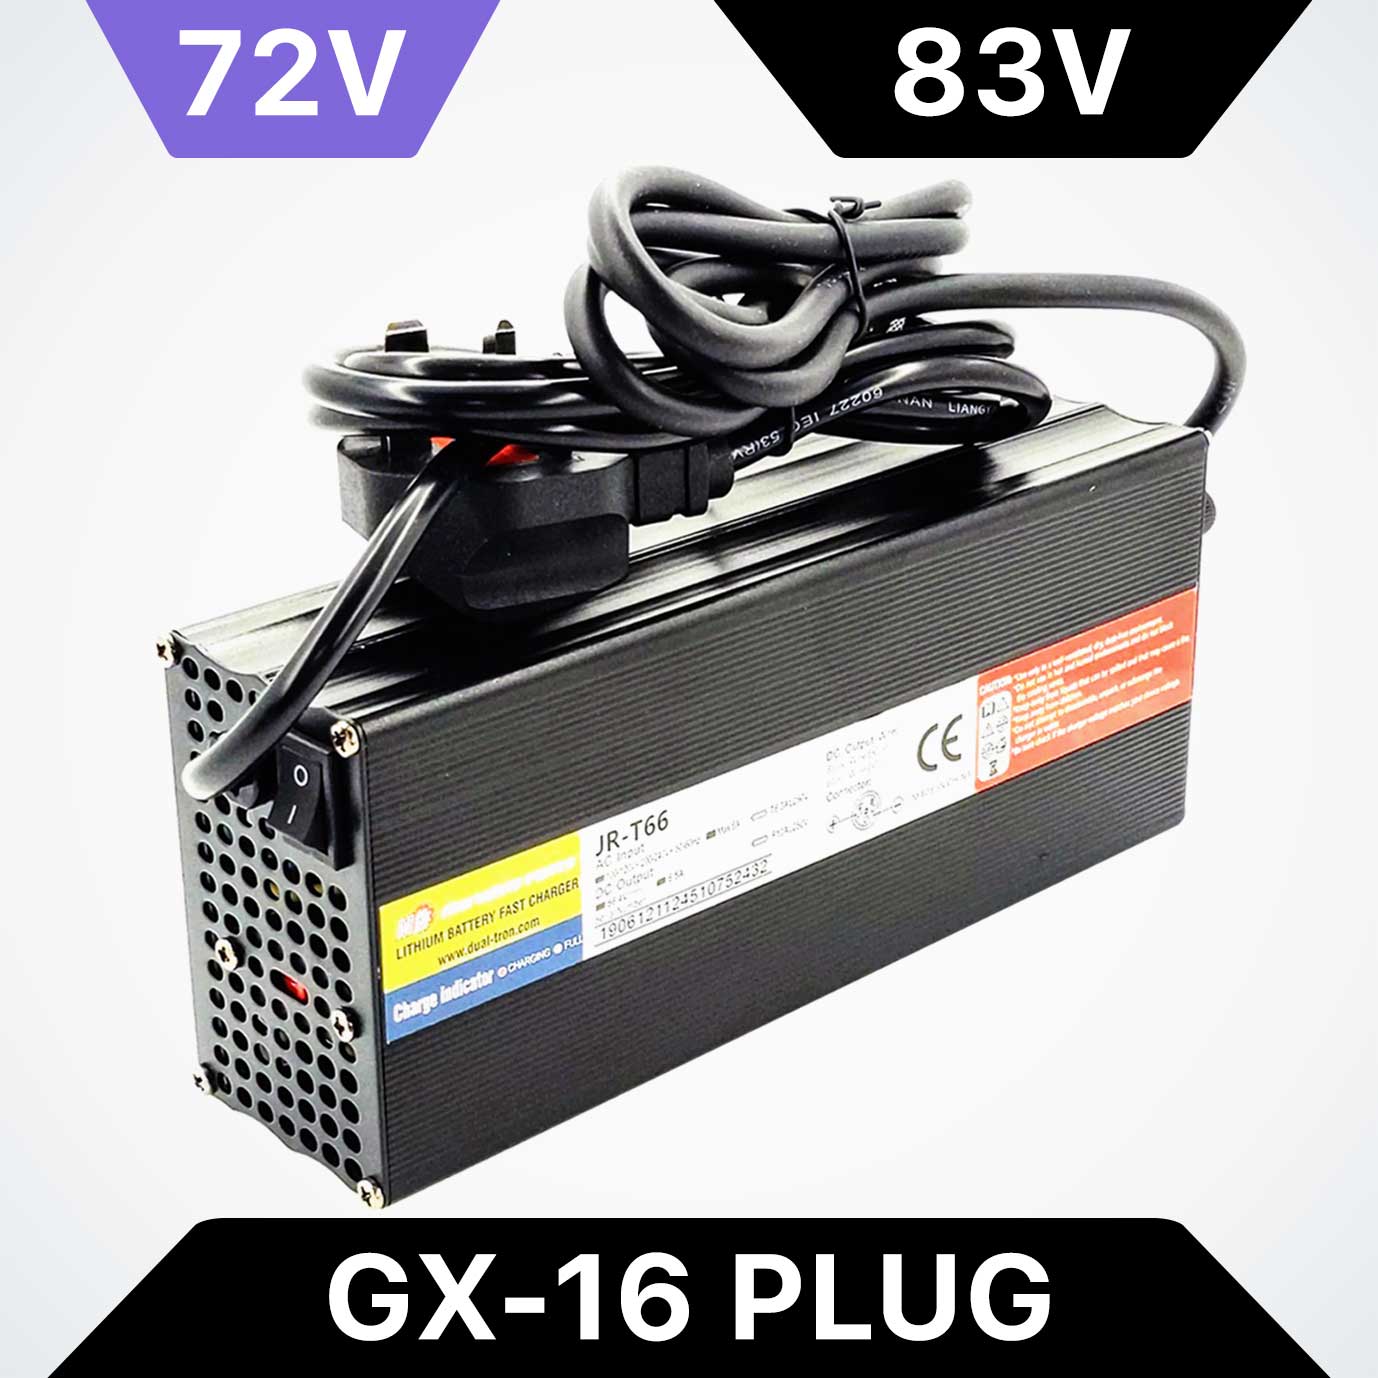 72V 5A Fast Charger for Dualtron, 83V Max, GX16 Plug